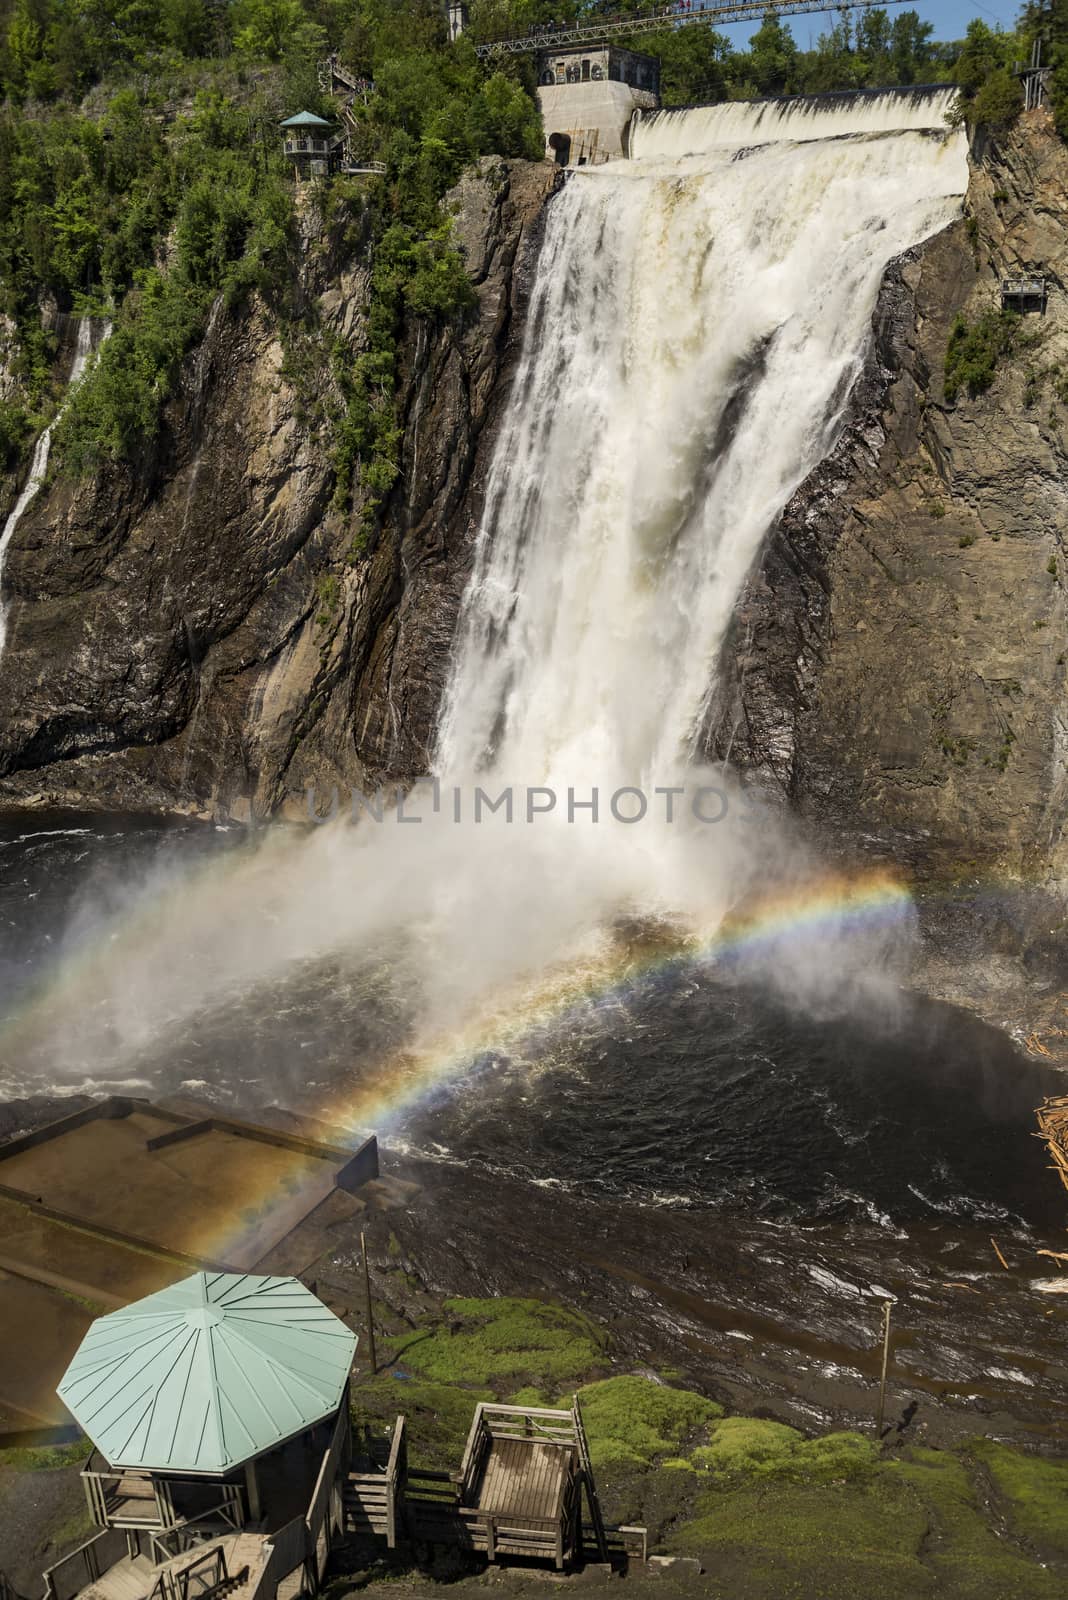 The magnificent rainbow plays in falls splashes. The blue lake and powerful waterfall Montmorency in Montmorency Falls Park, in Quebec. The concept of active and cultural tourism